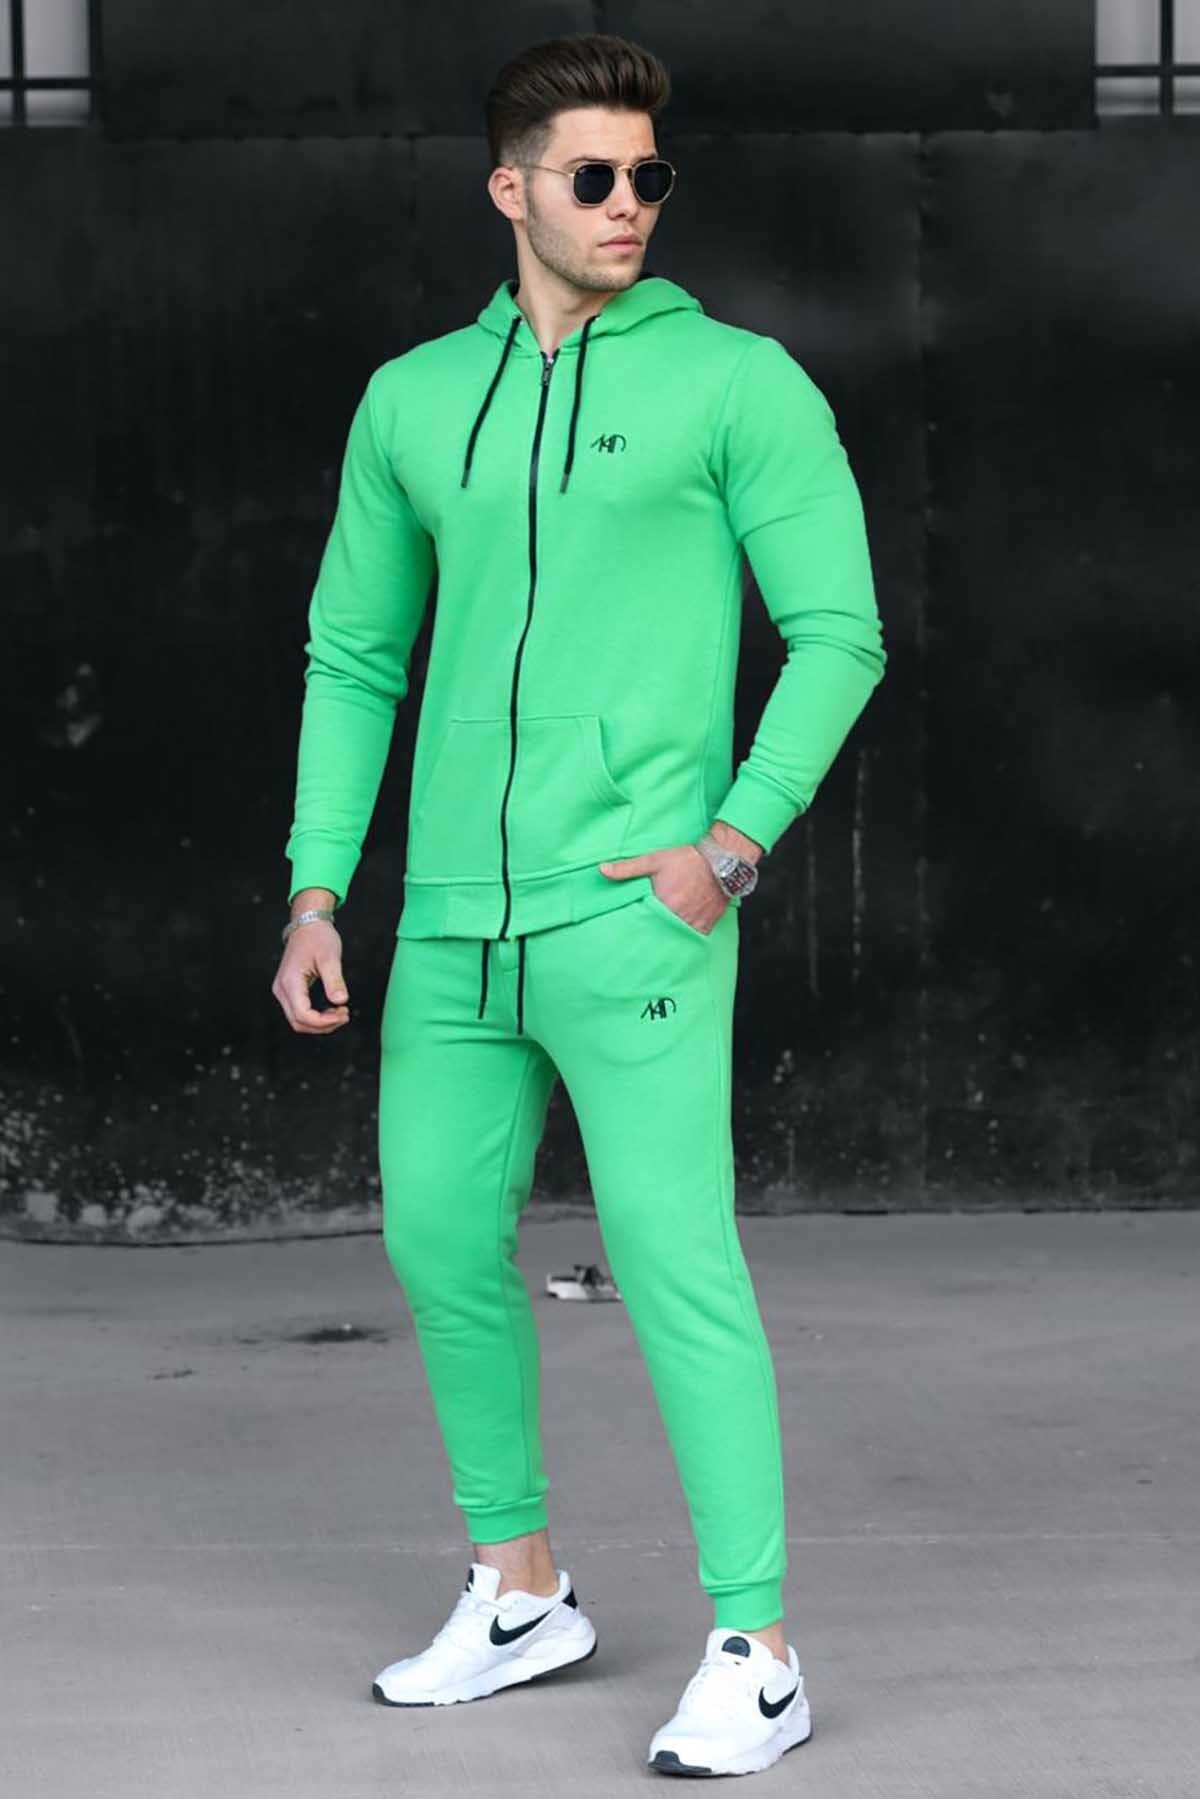 Madmext Green Tracksuit Set 4779